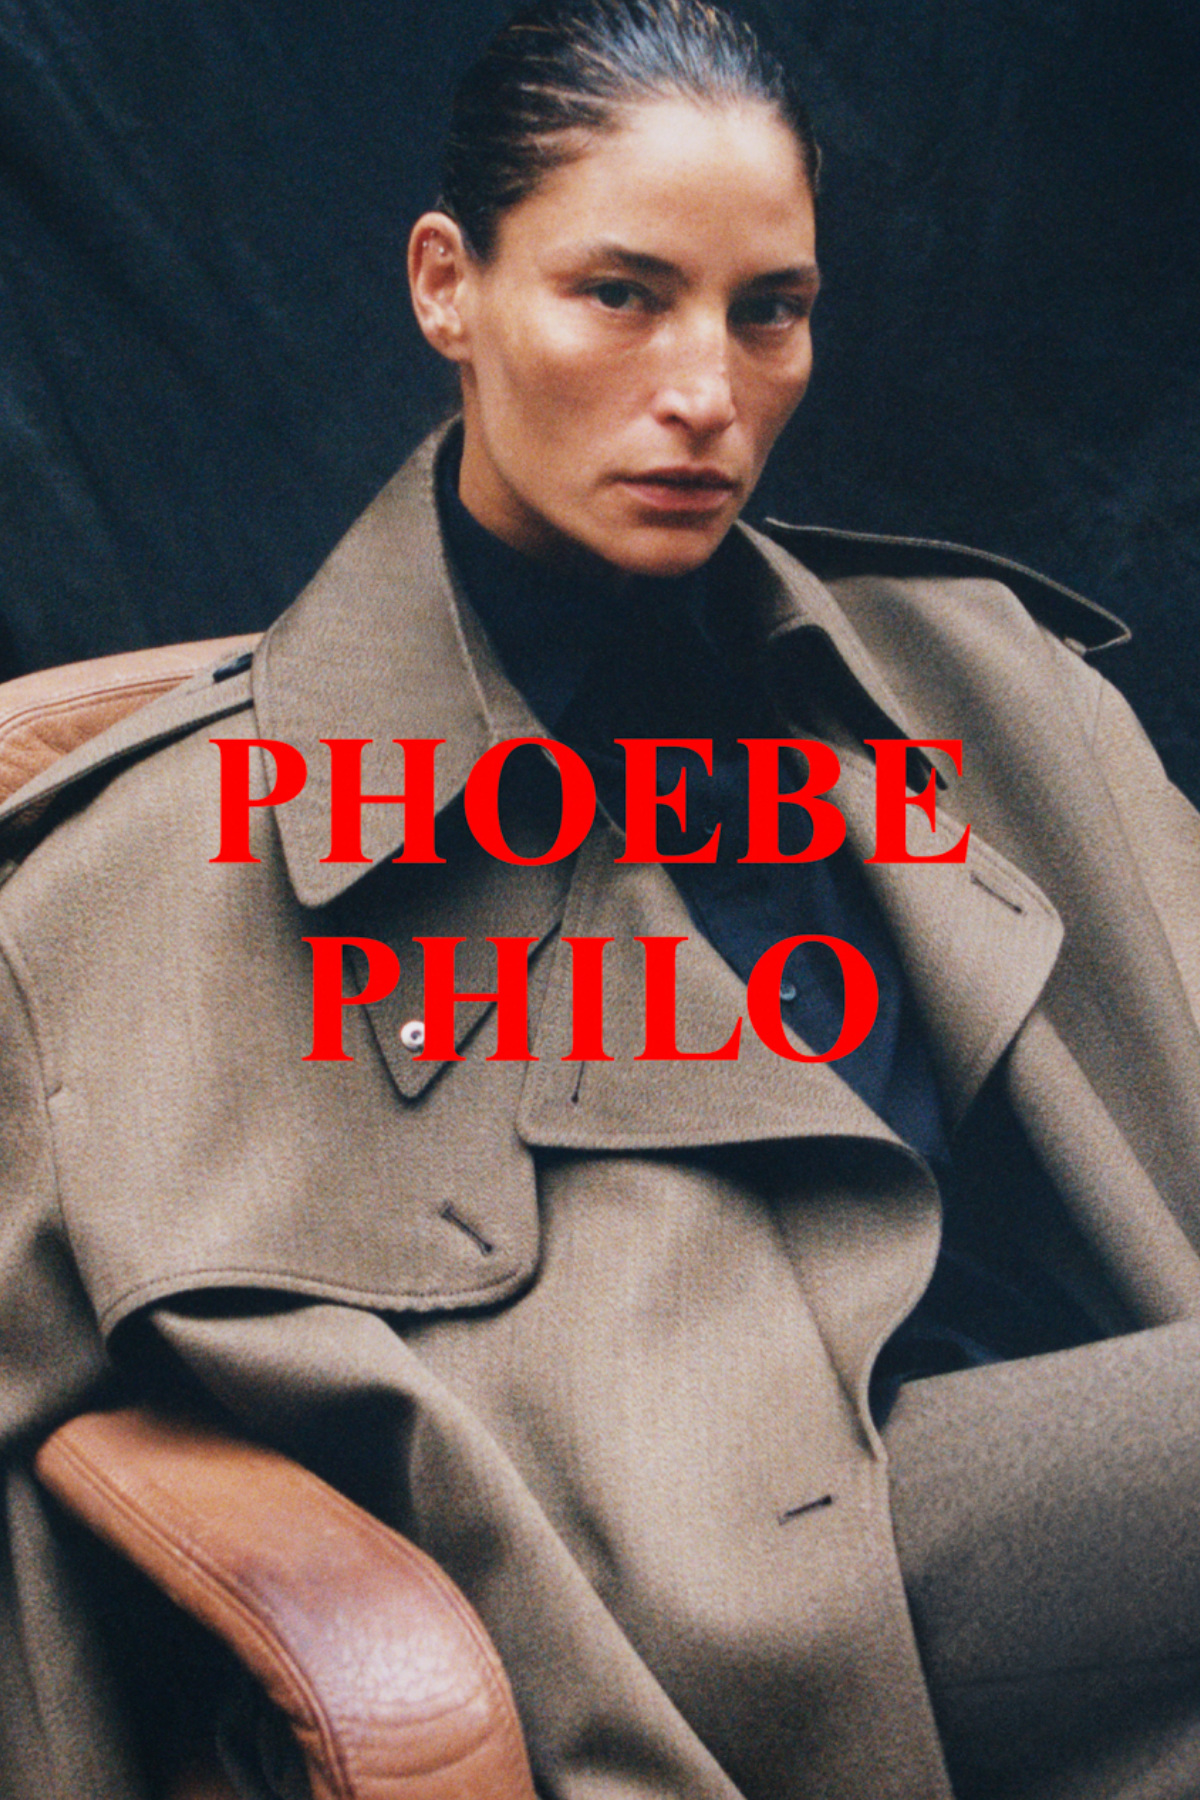 Cult designer Phoebe Philo launches long-awaited debut collection